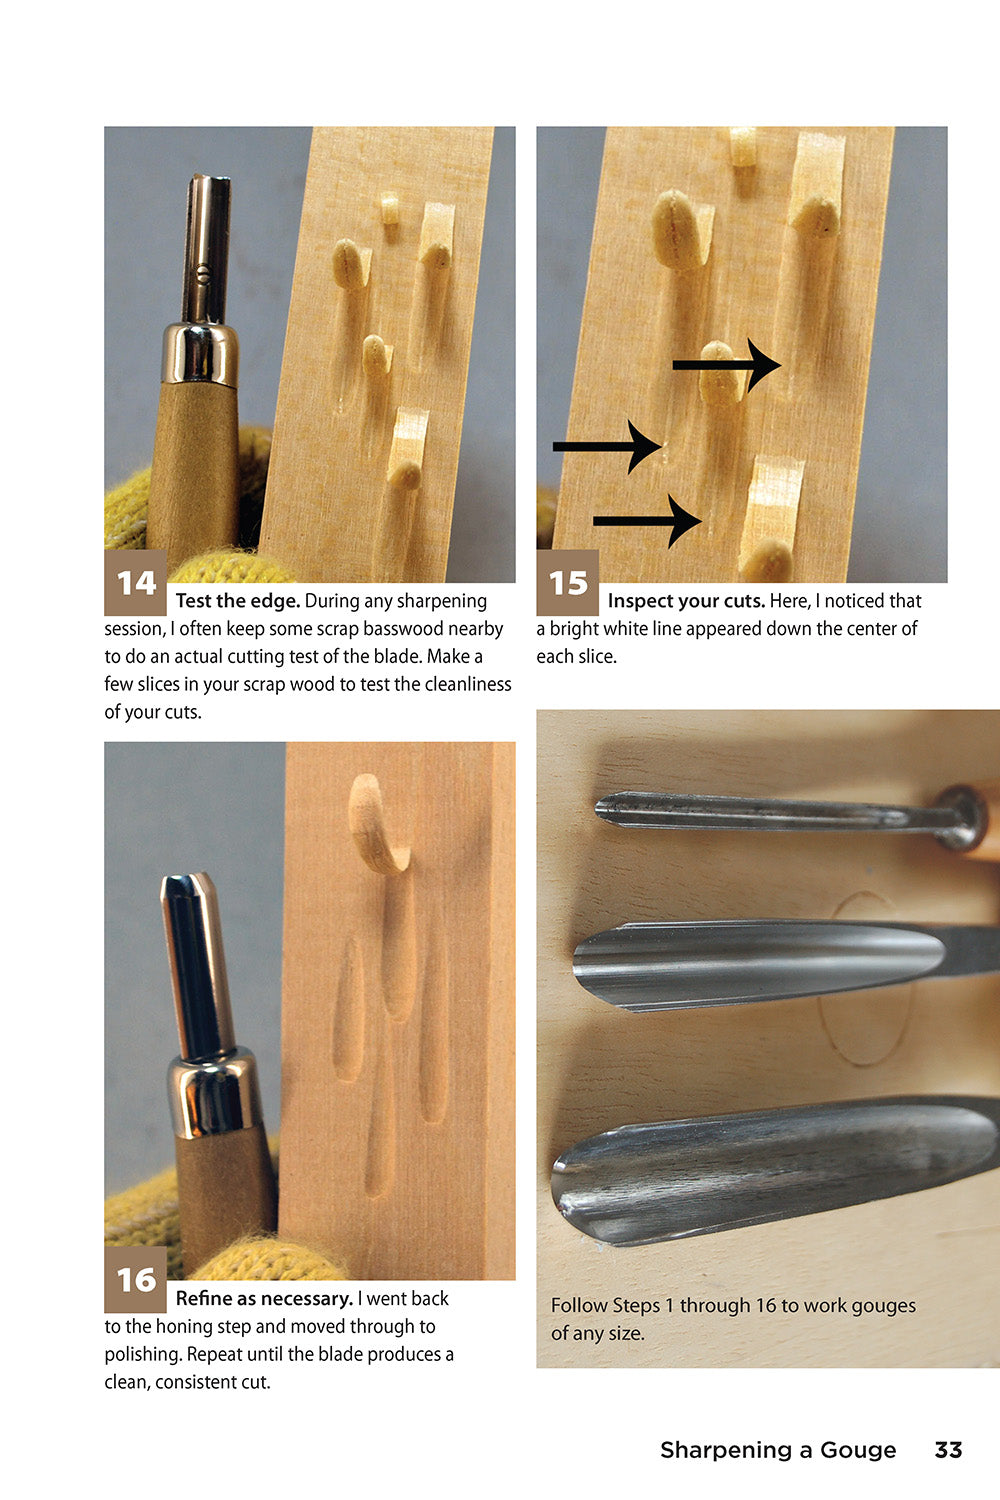 How to maintain your wood carving tools?